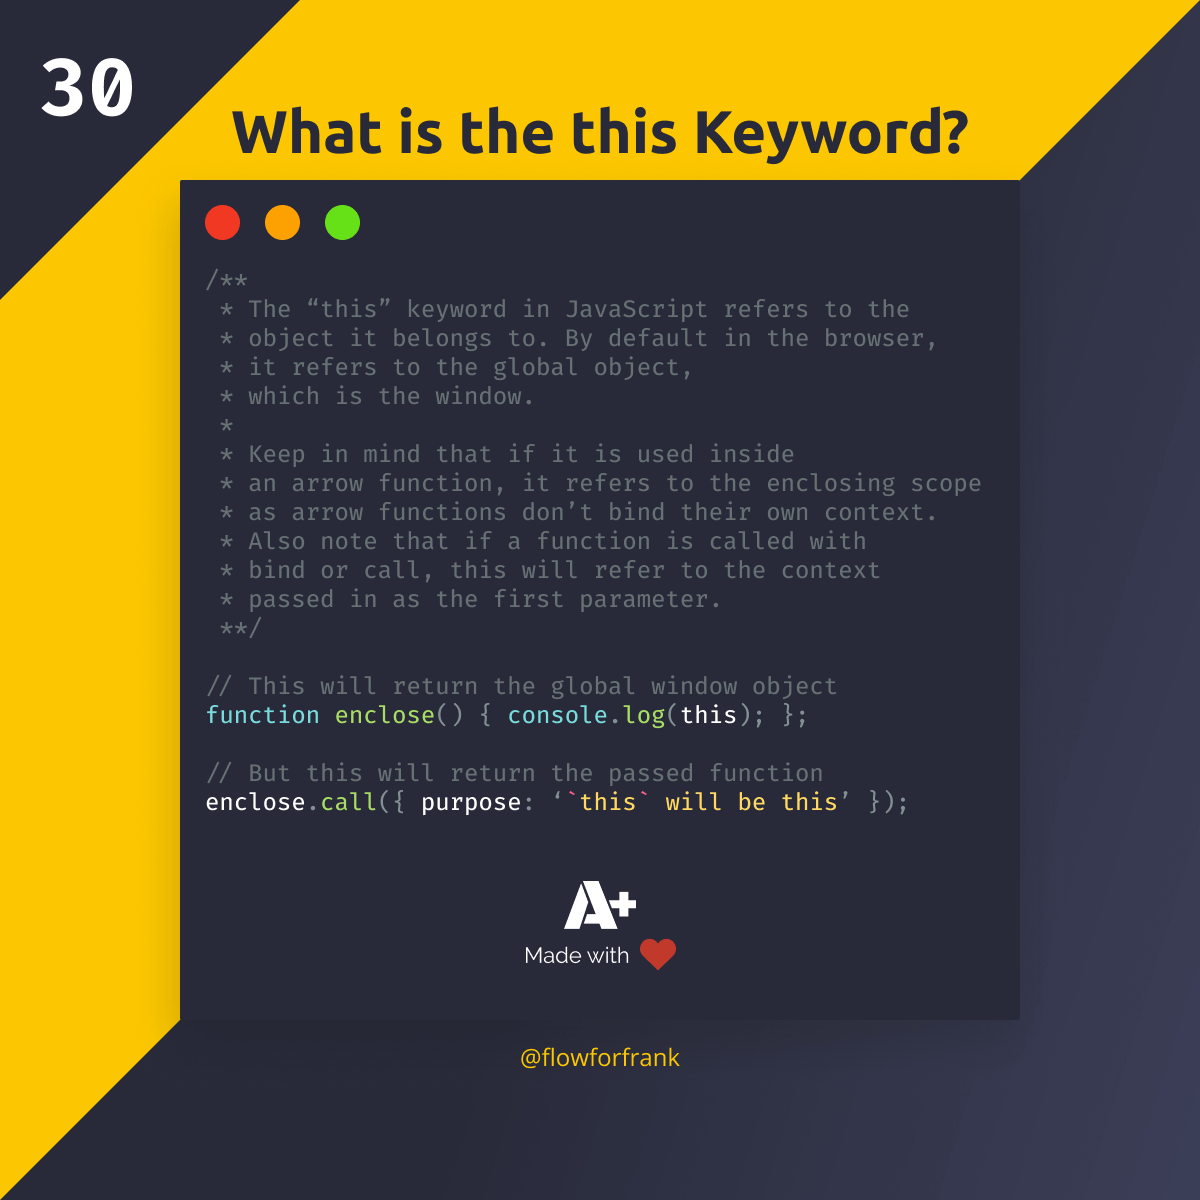 What is the this Keyword in JavaScript?